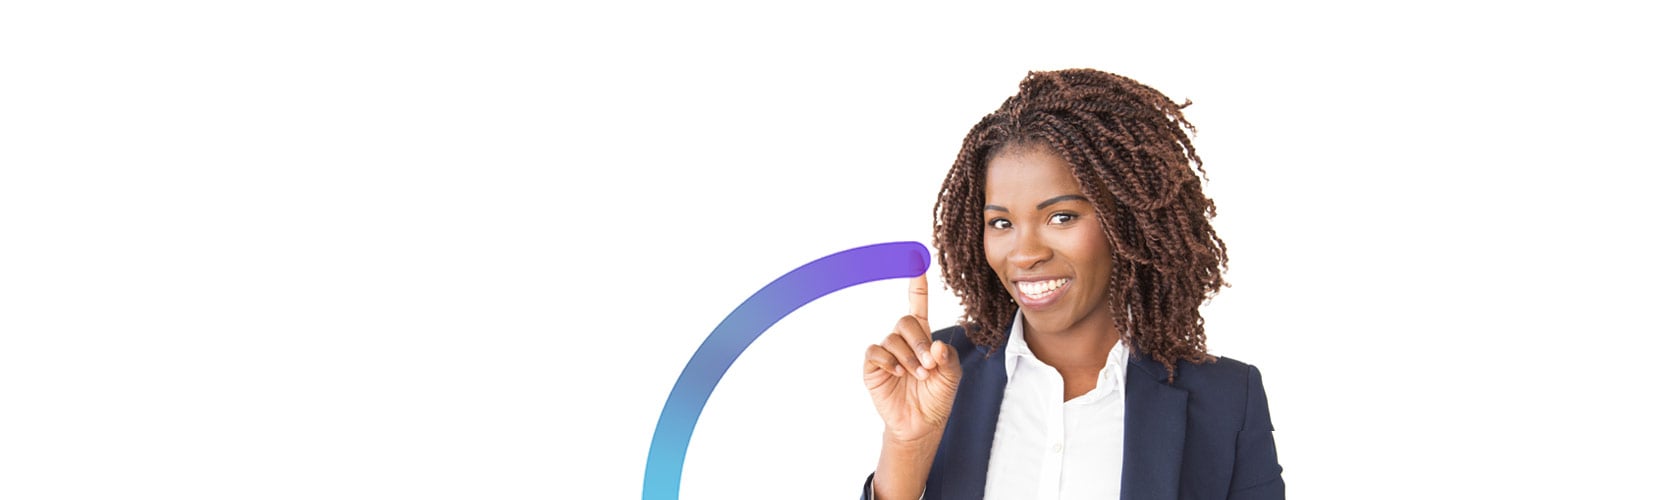 Female Informa colleague smiling and pointing towards the camera, tracing the Informa logo with her finger